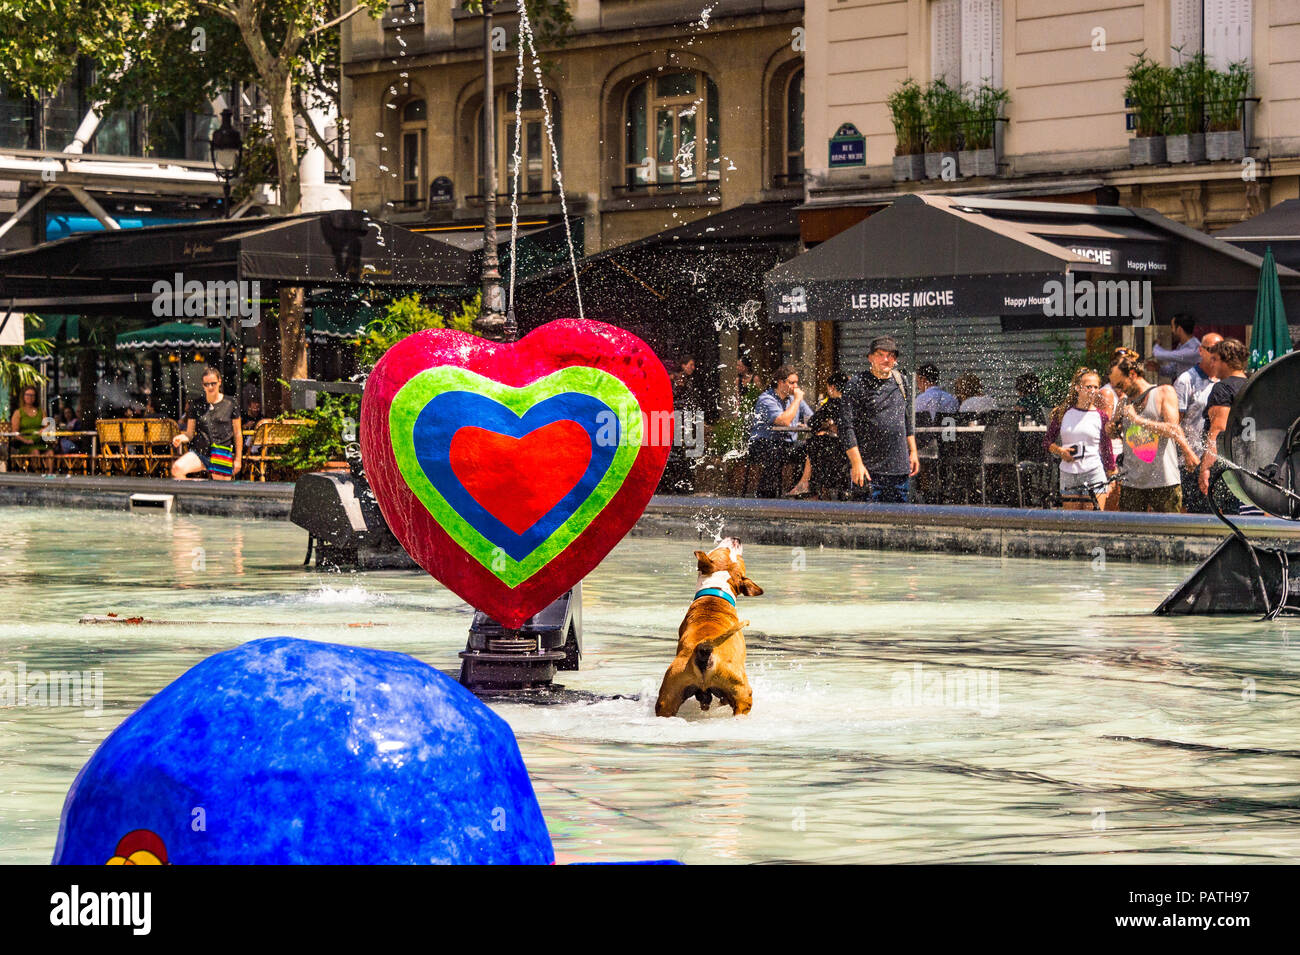 A dog plays in the Stravinsky Fountain, next to the Centre Pompidou, Paris, France Stock Photo